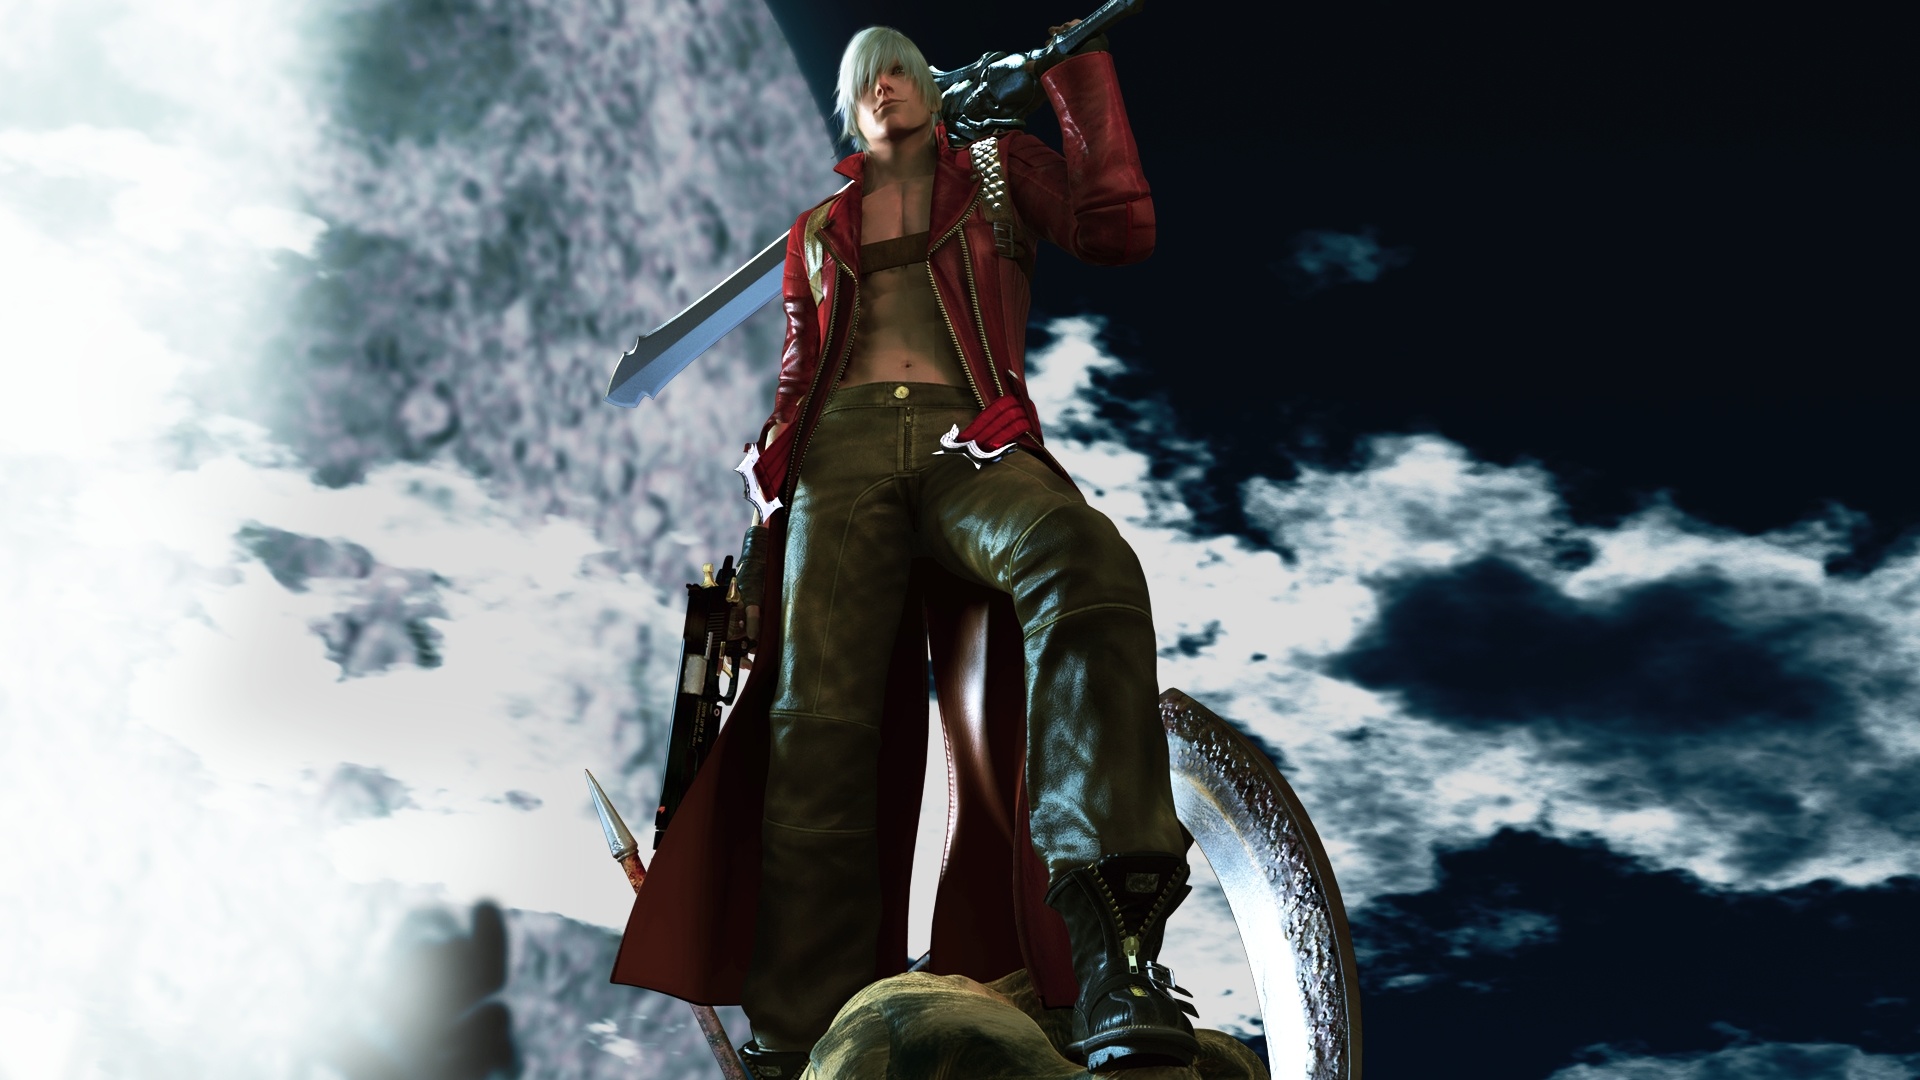 dante devil may cry 5 download